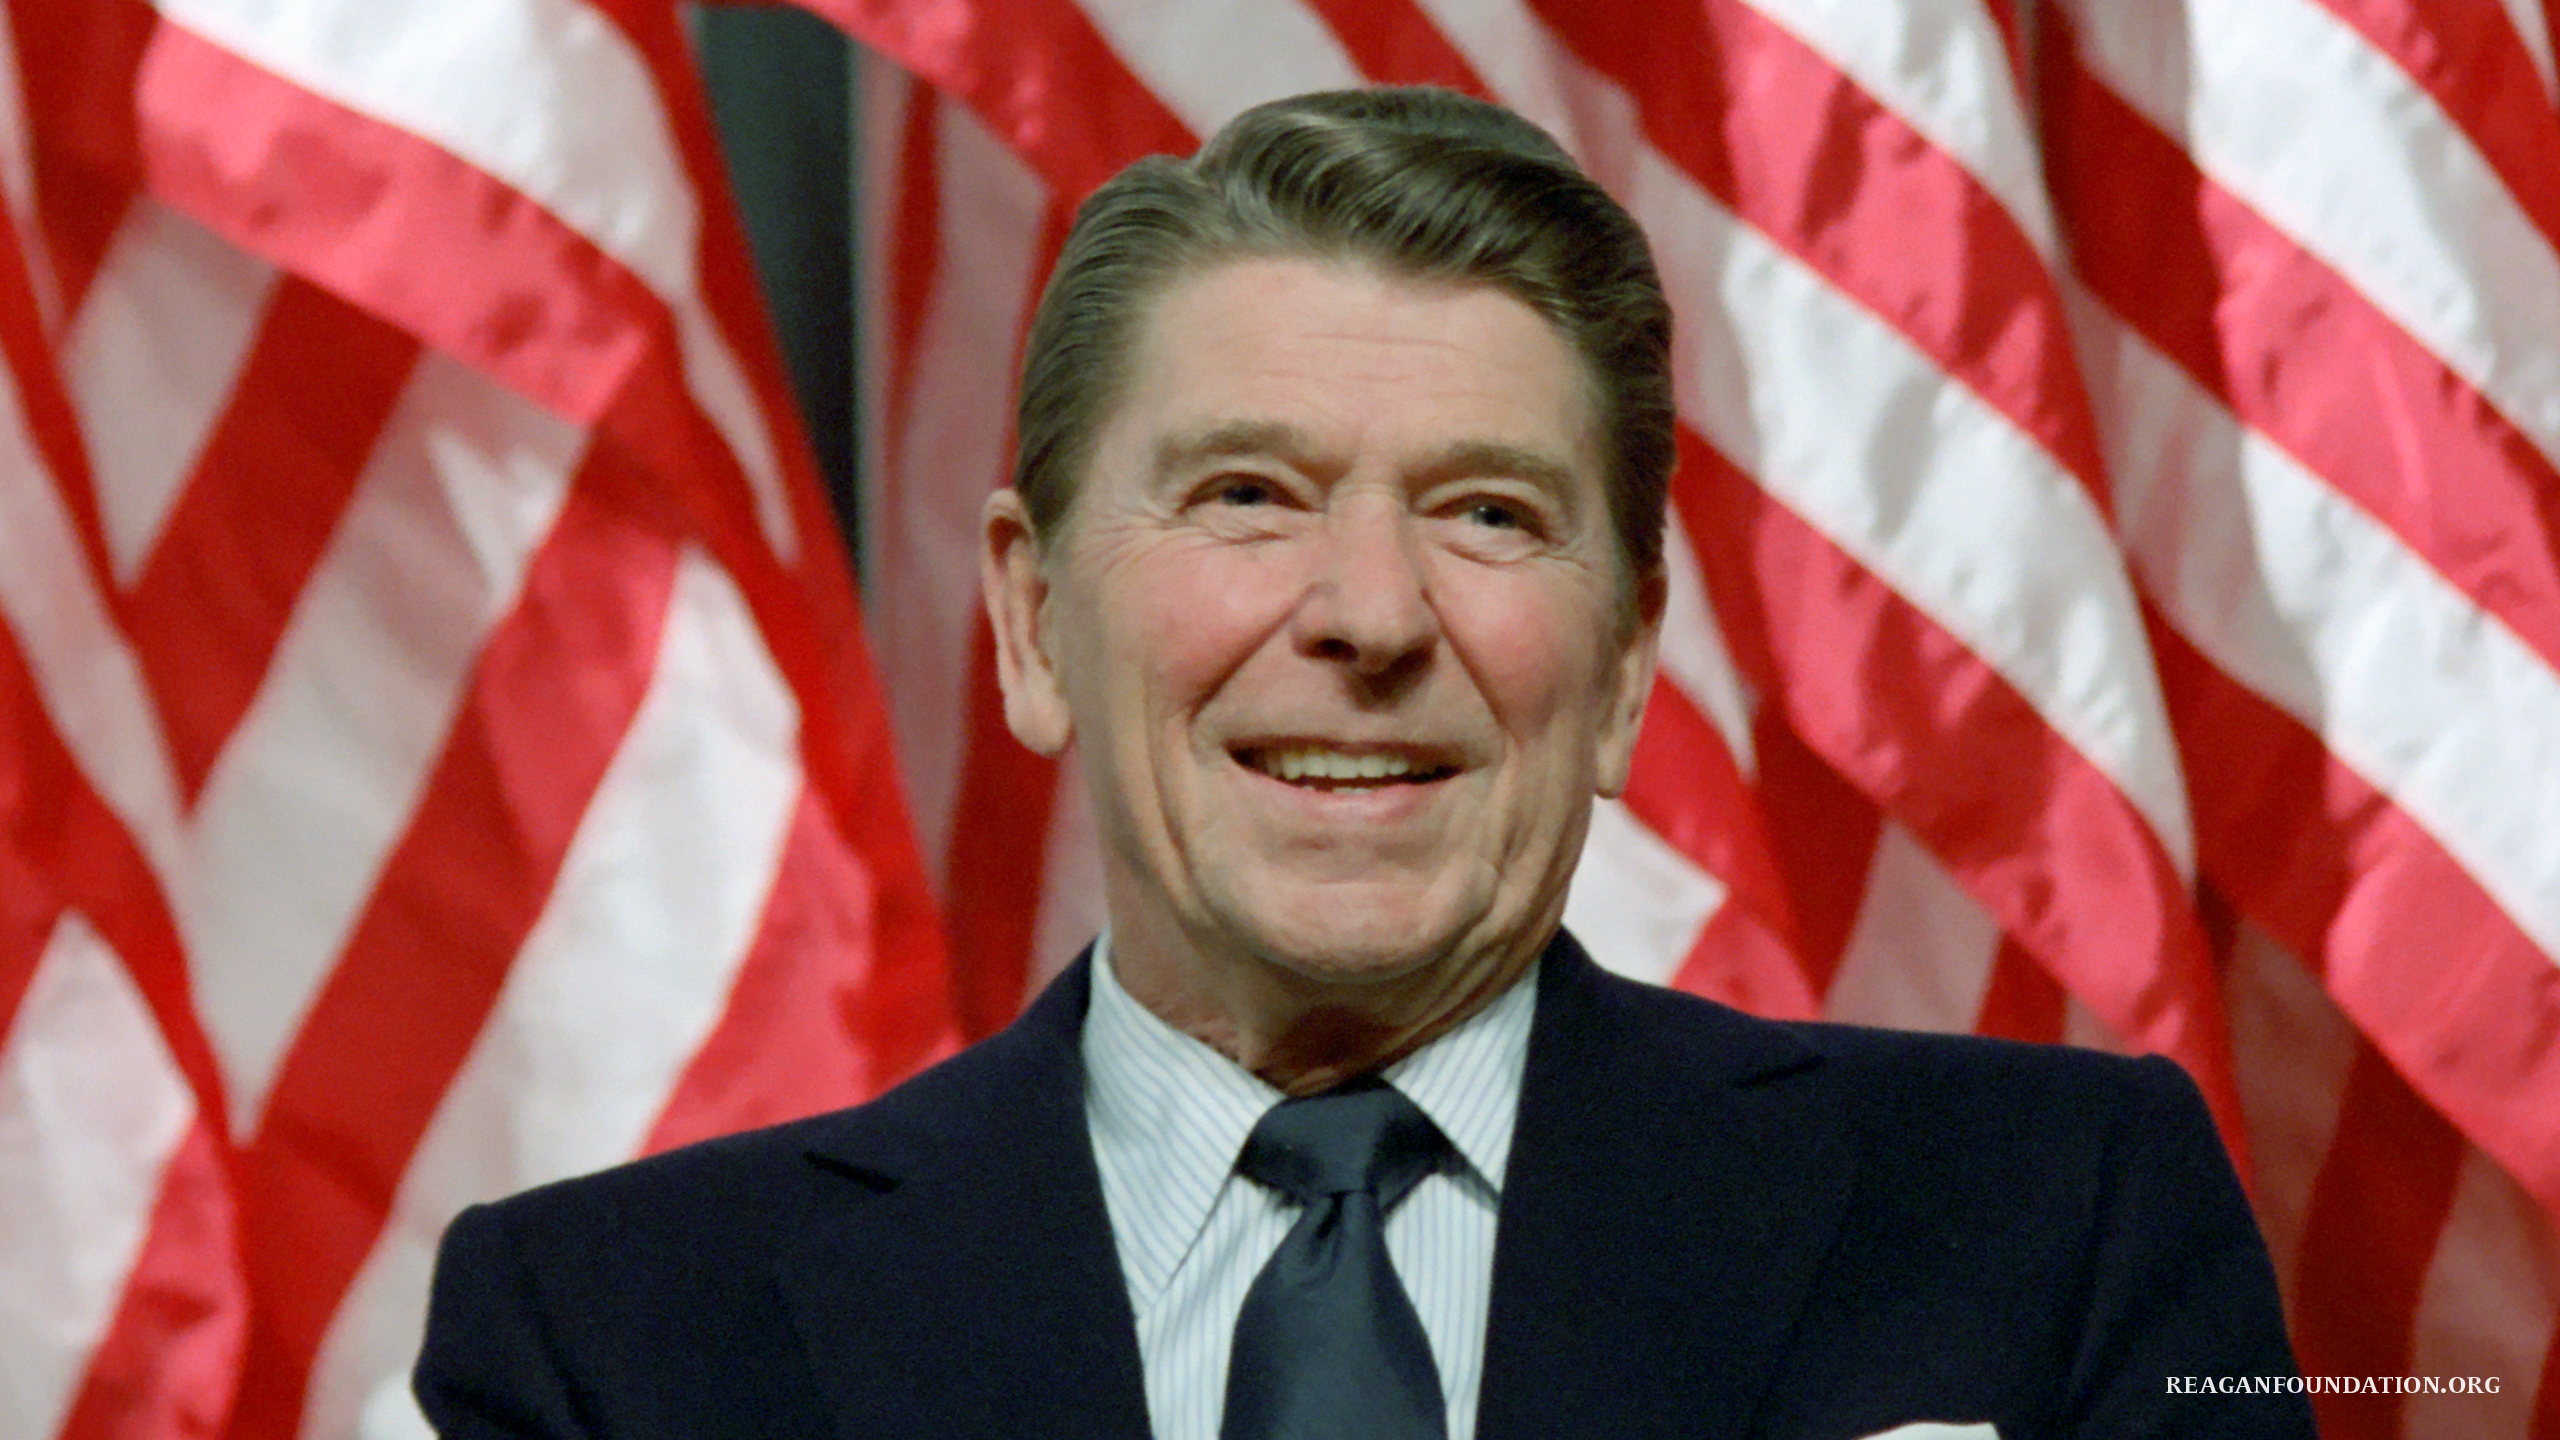 Reagan Wallpaper Archive - Ronald Reagan Presidential Foundation and Library